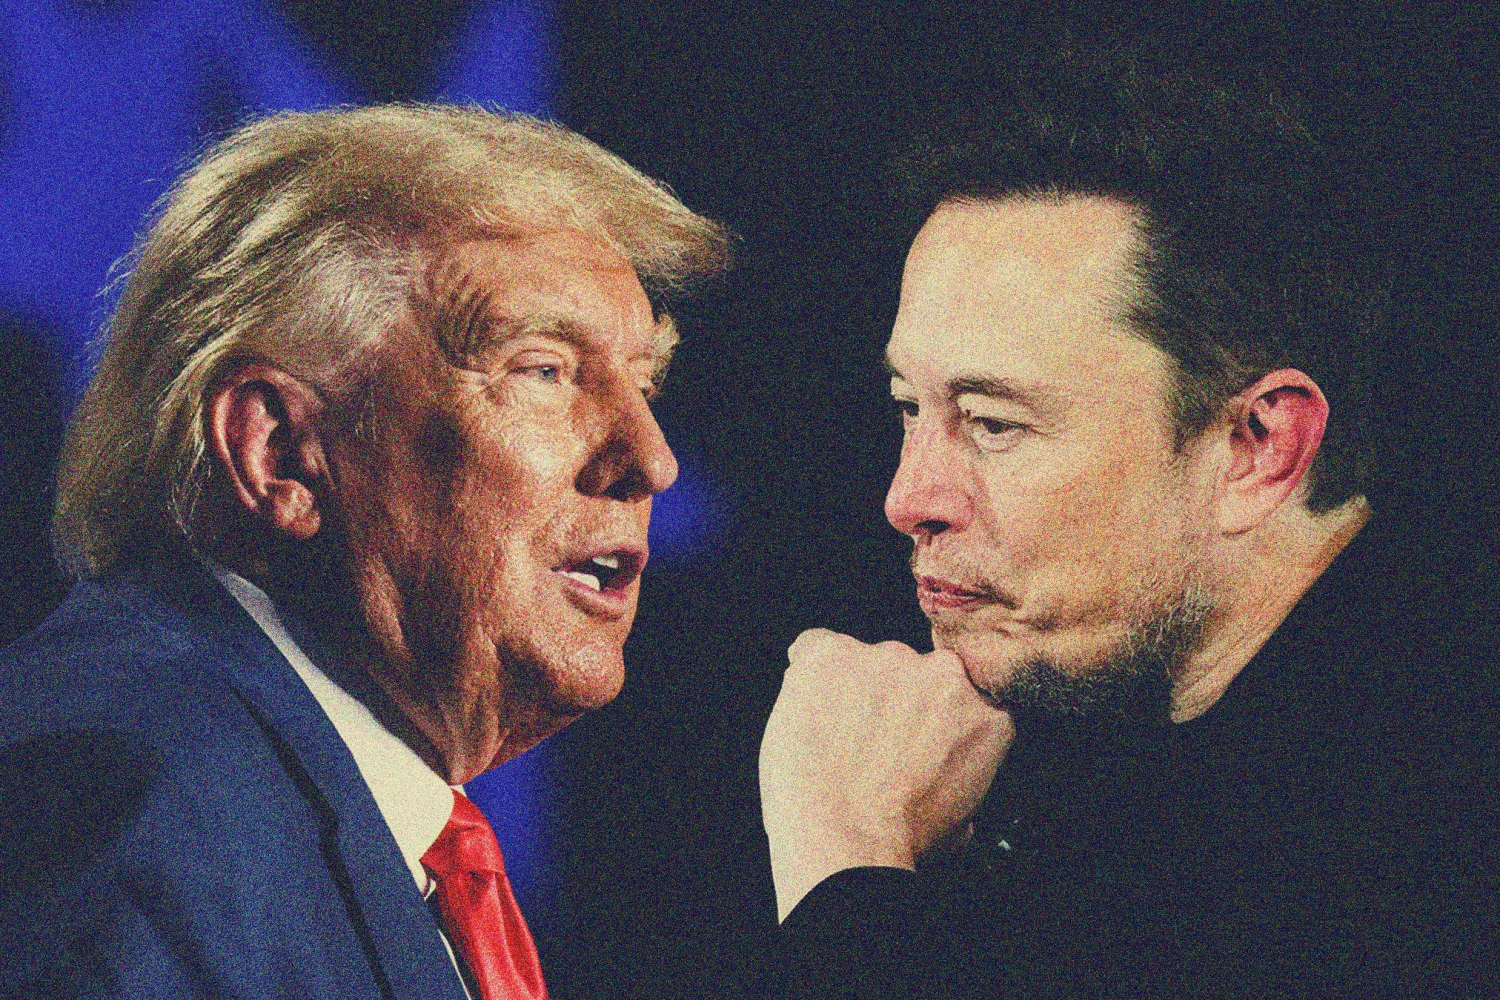 Elon Musk and Donald Trump's Surprise Chat: What's Behind Their Latest Get-Together?